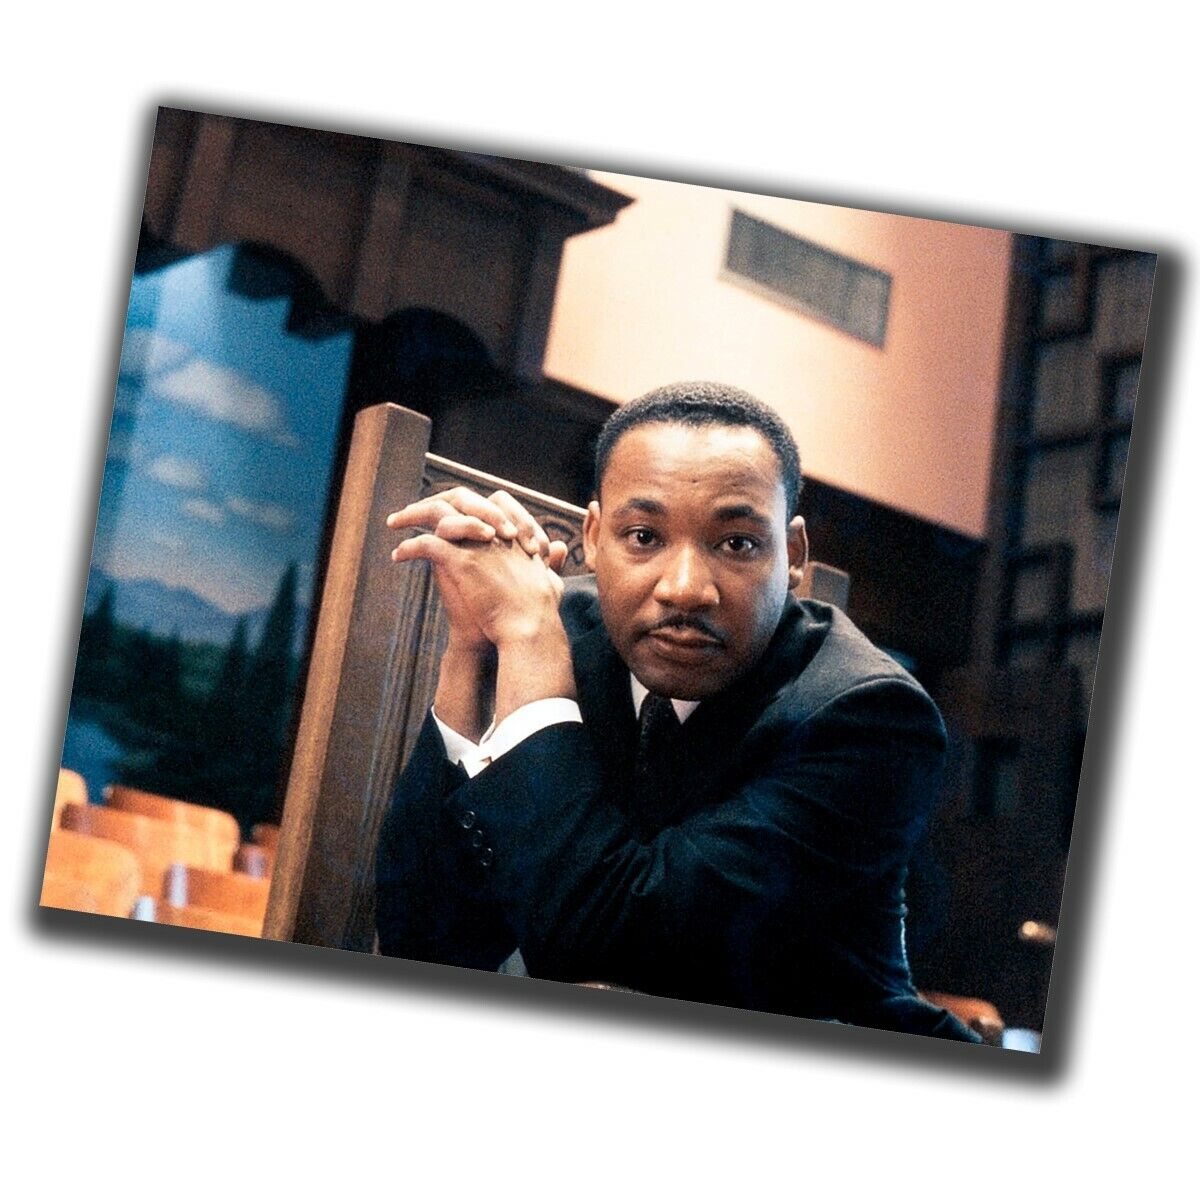 martin luther king FINE ART Vintage Retro Photo Glossy Big Size 8X10in ζ067